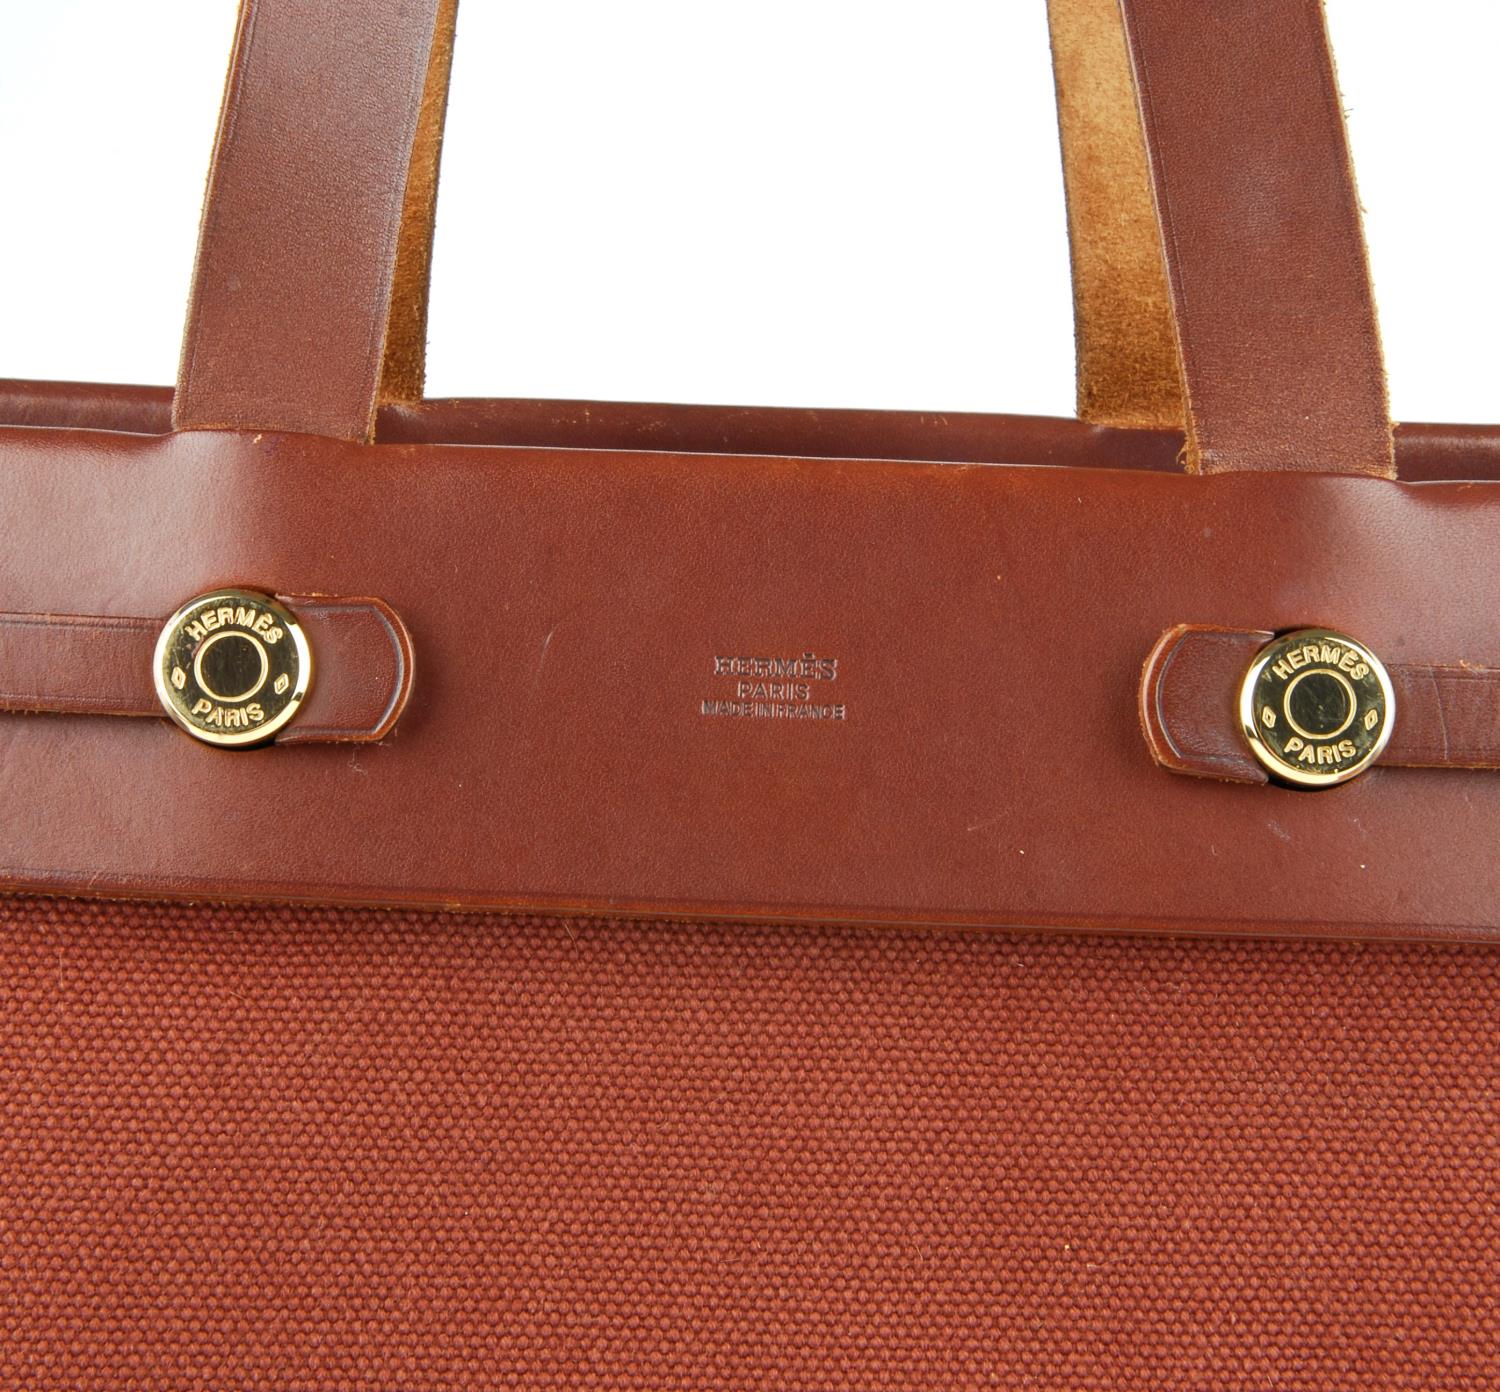 HERMÈS - a toile 2-in-1 Herbag Cabas MM handbag. A versatile bag, designed as two bags in one with - Image 2 of 6